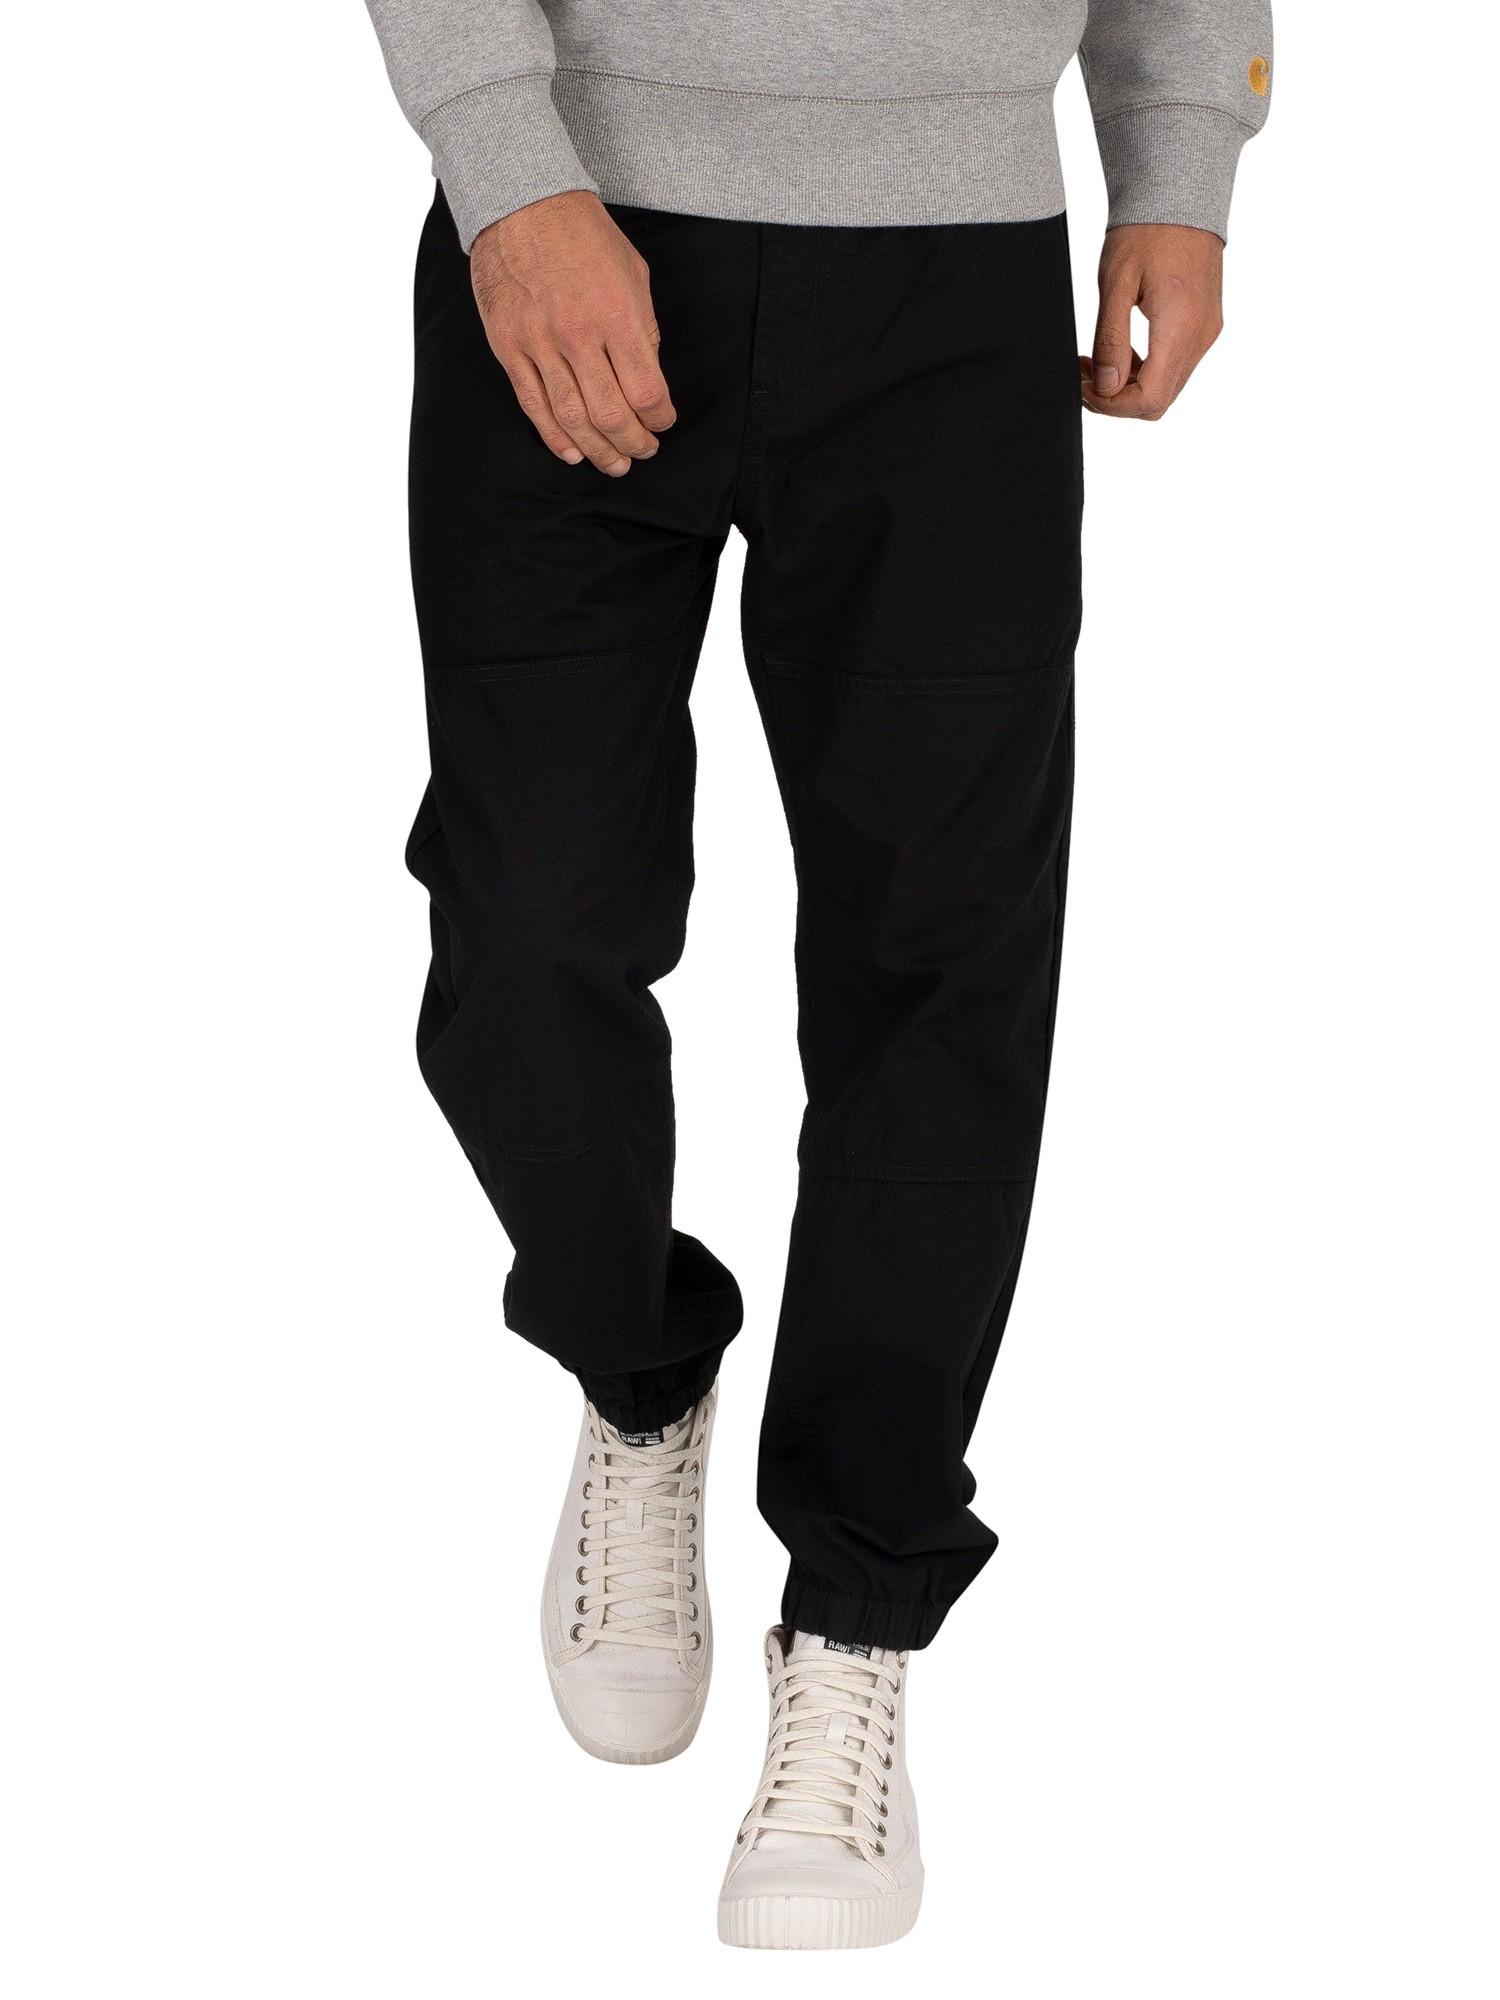 Carhartt WIP Marshall Joggers in Black for Men - Lyst